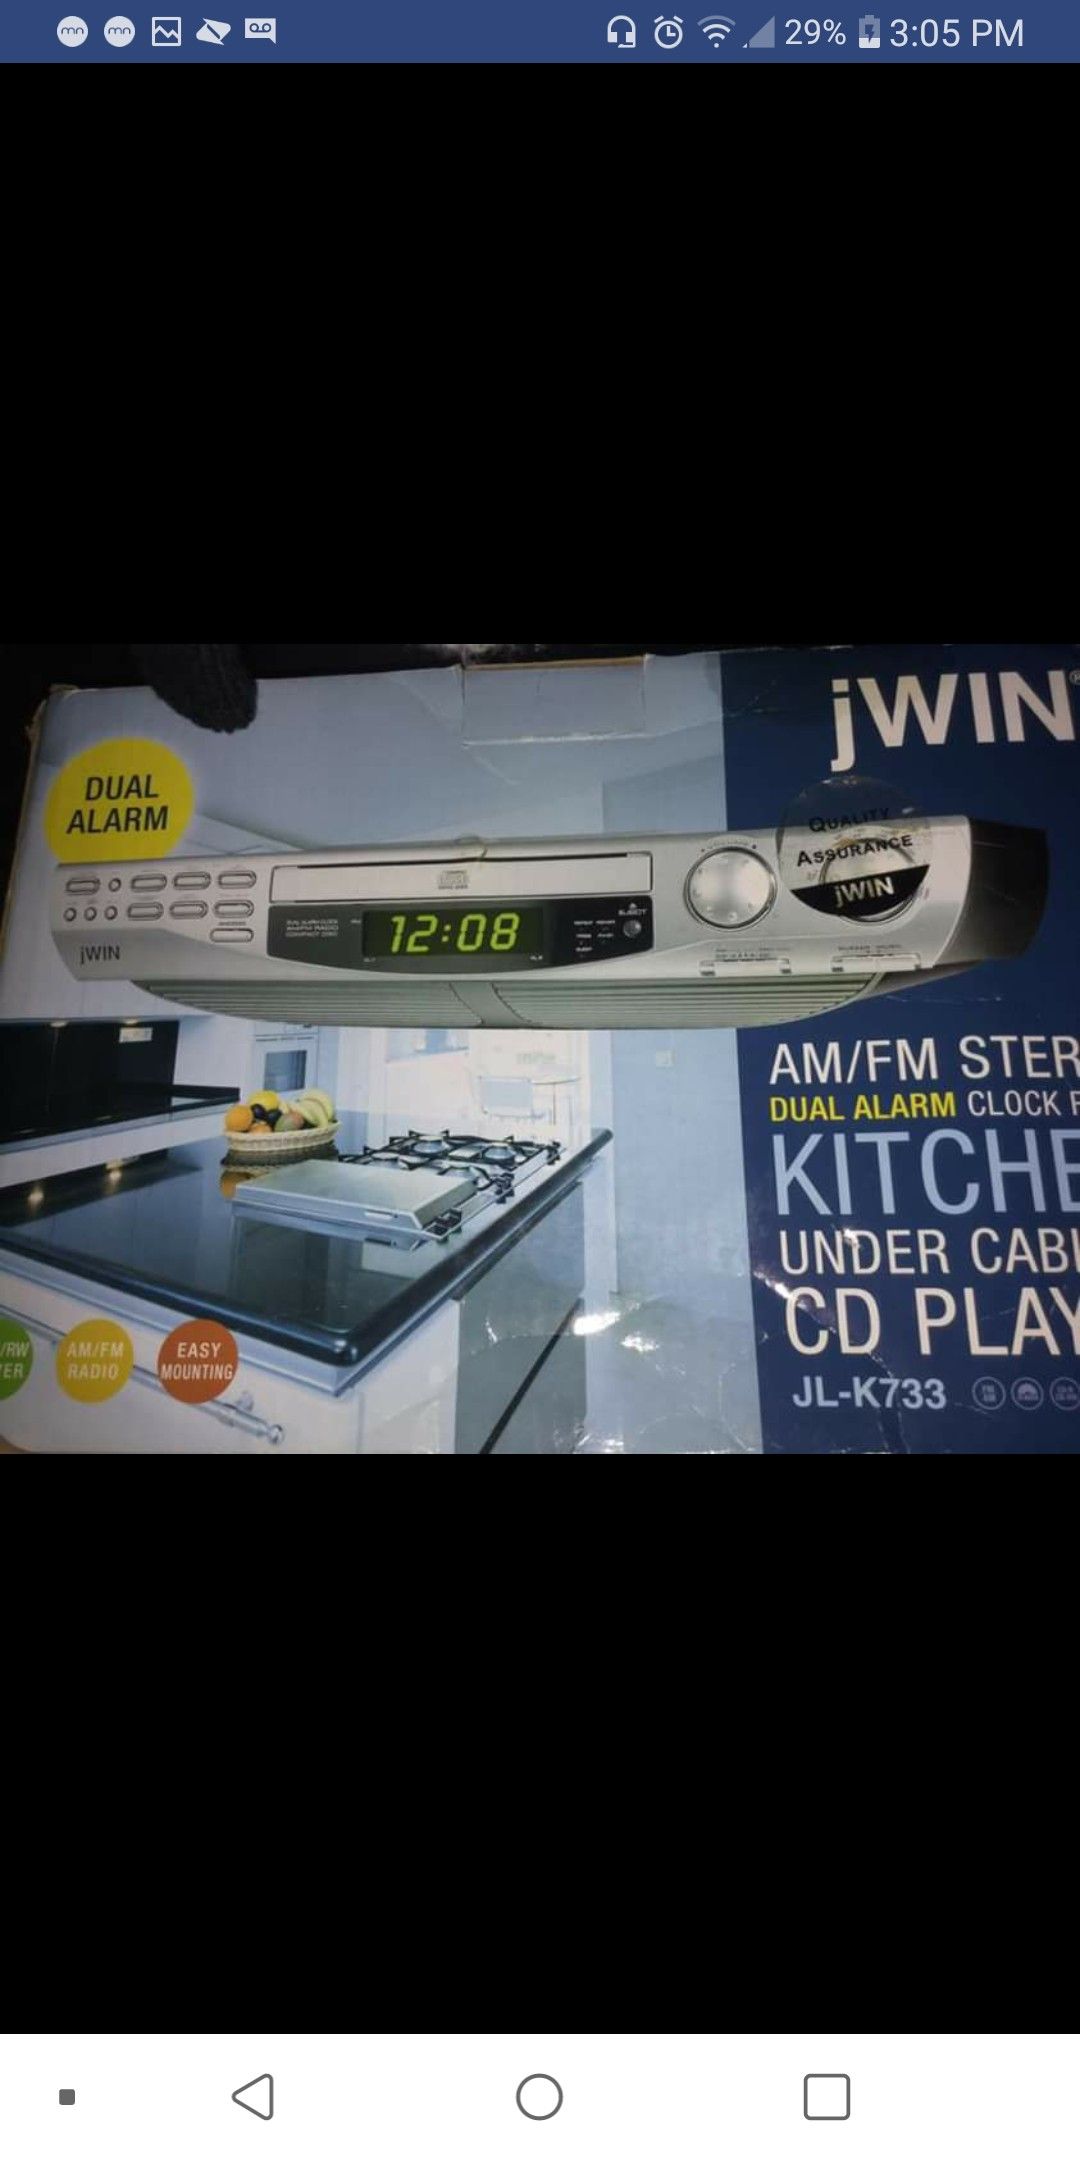 Jwin stereo system